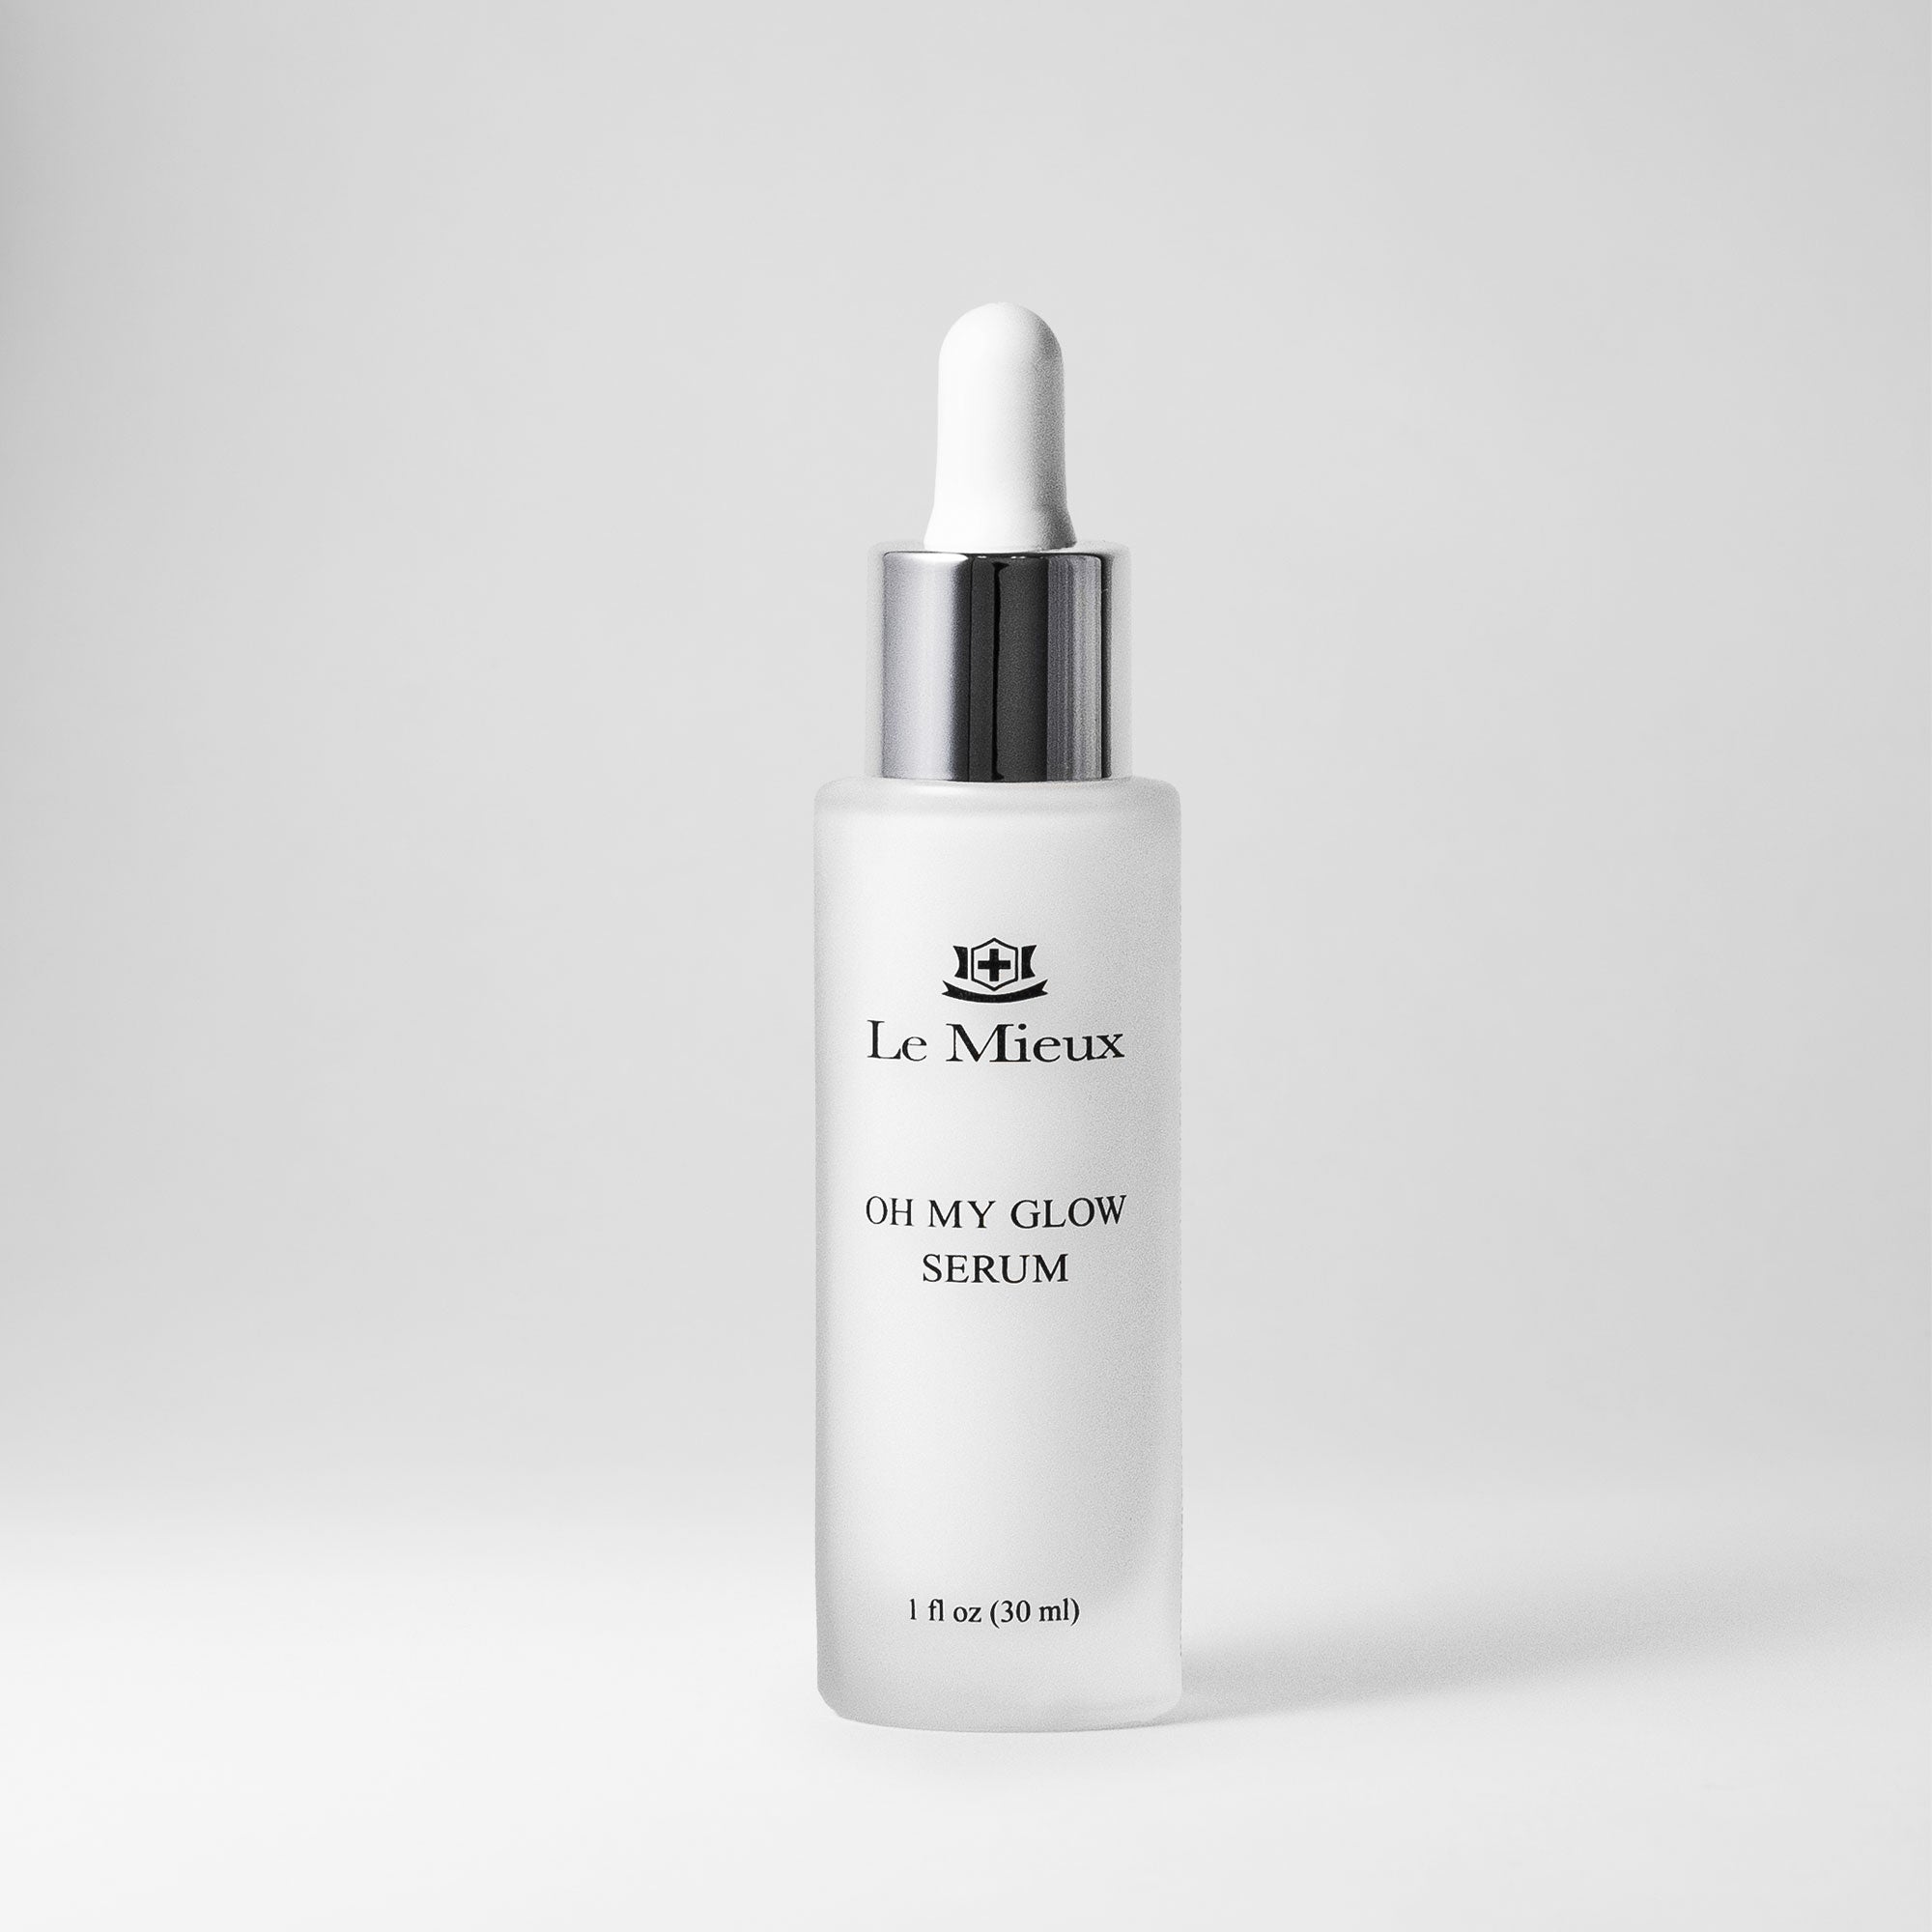  OH MY GLOW SERUM from Le Mieux Skincare - 1